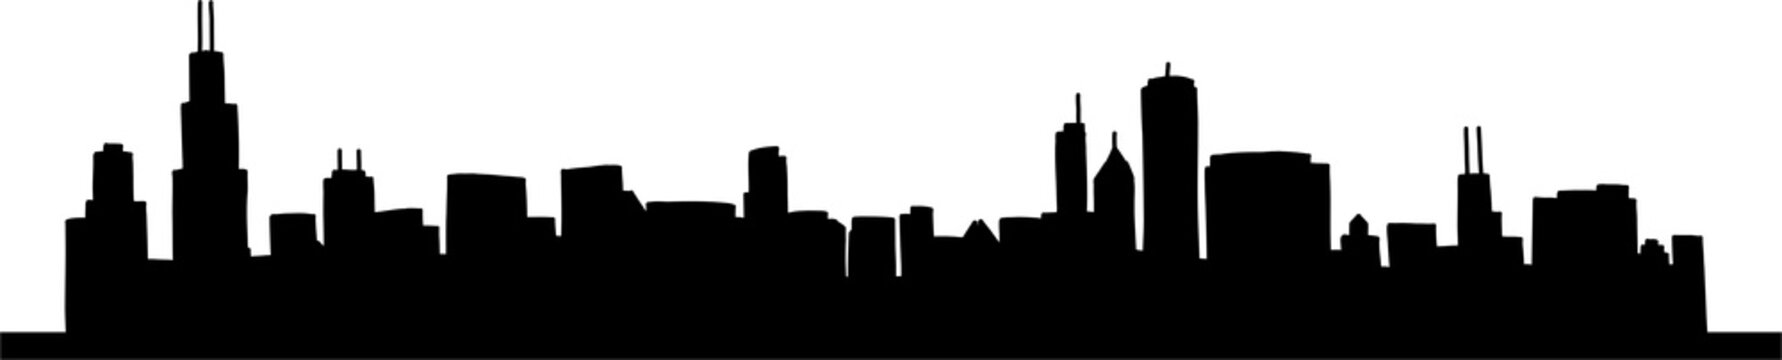 Modern Cityscape Skyline Silhouette Doodle Drawing